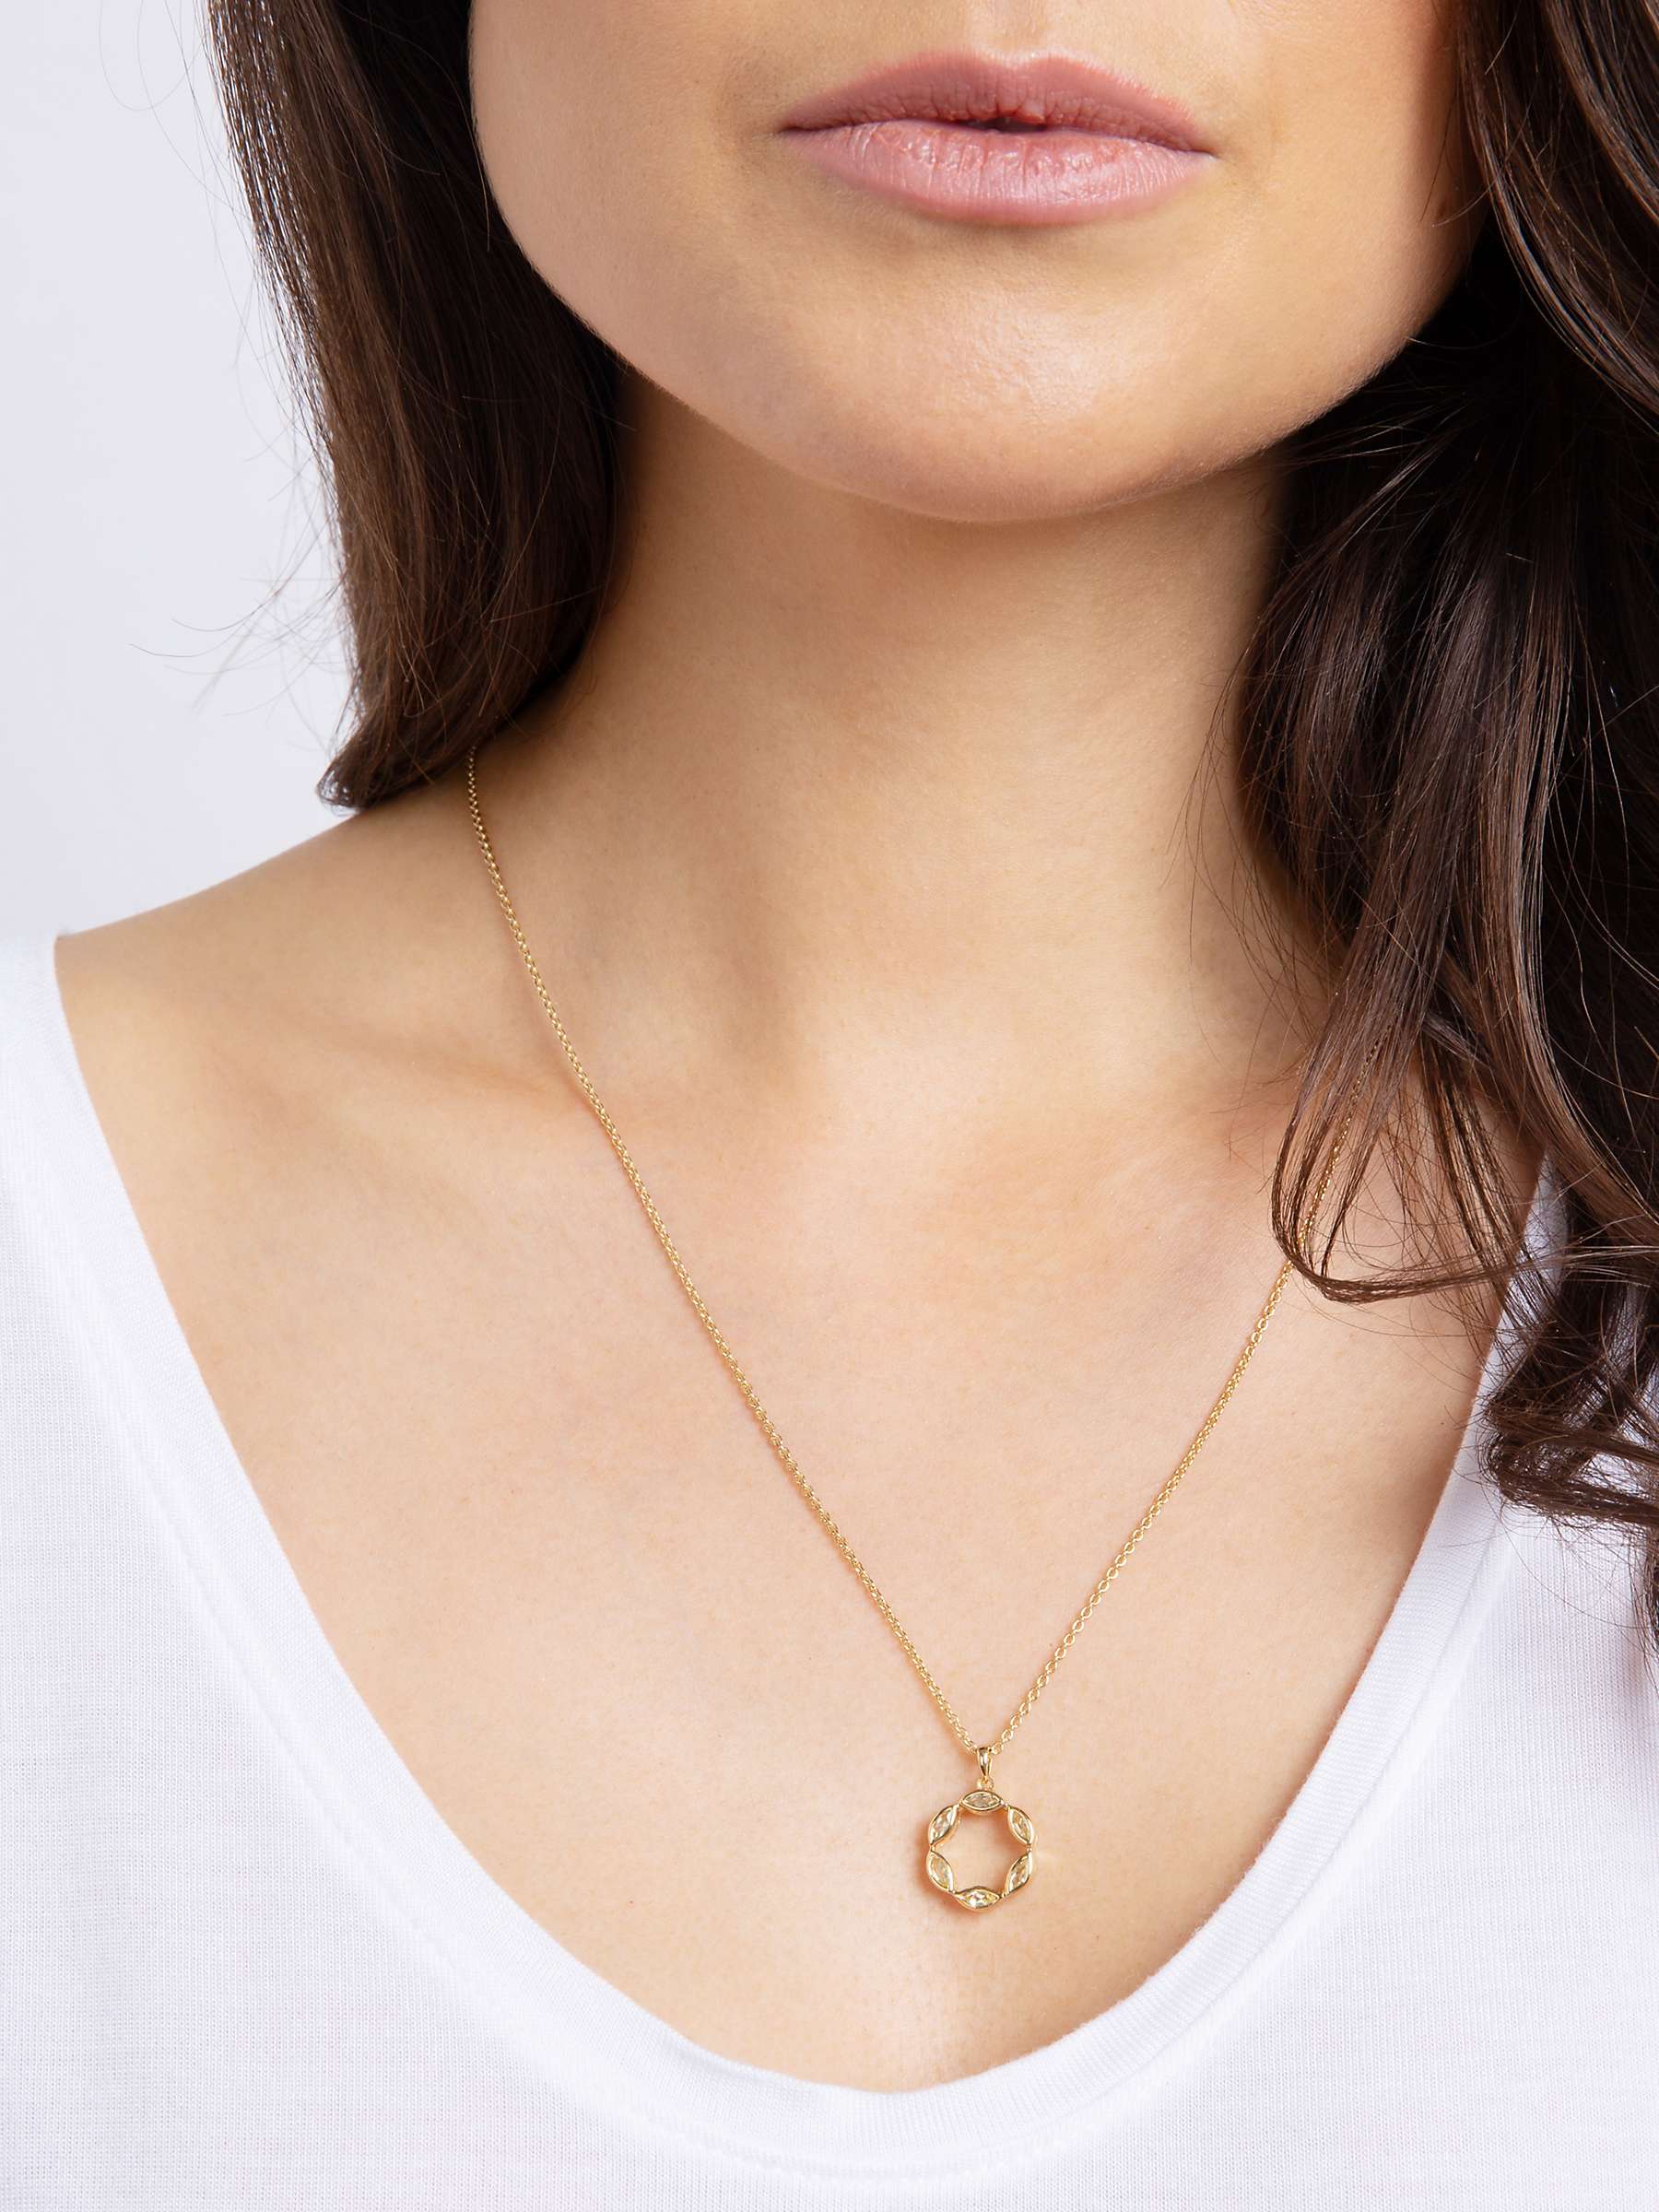 Buy Emily Mortimer Jewellery Halcyon Round Pendant Necklace Online at johnlewis.com